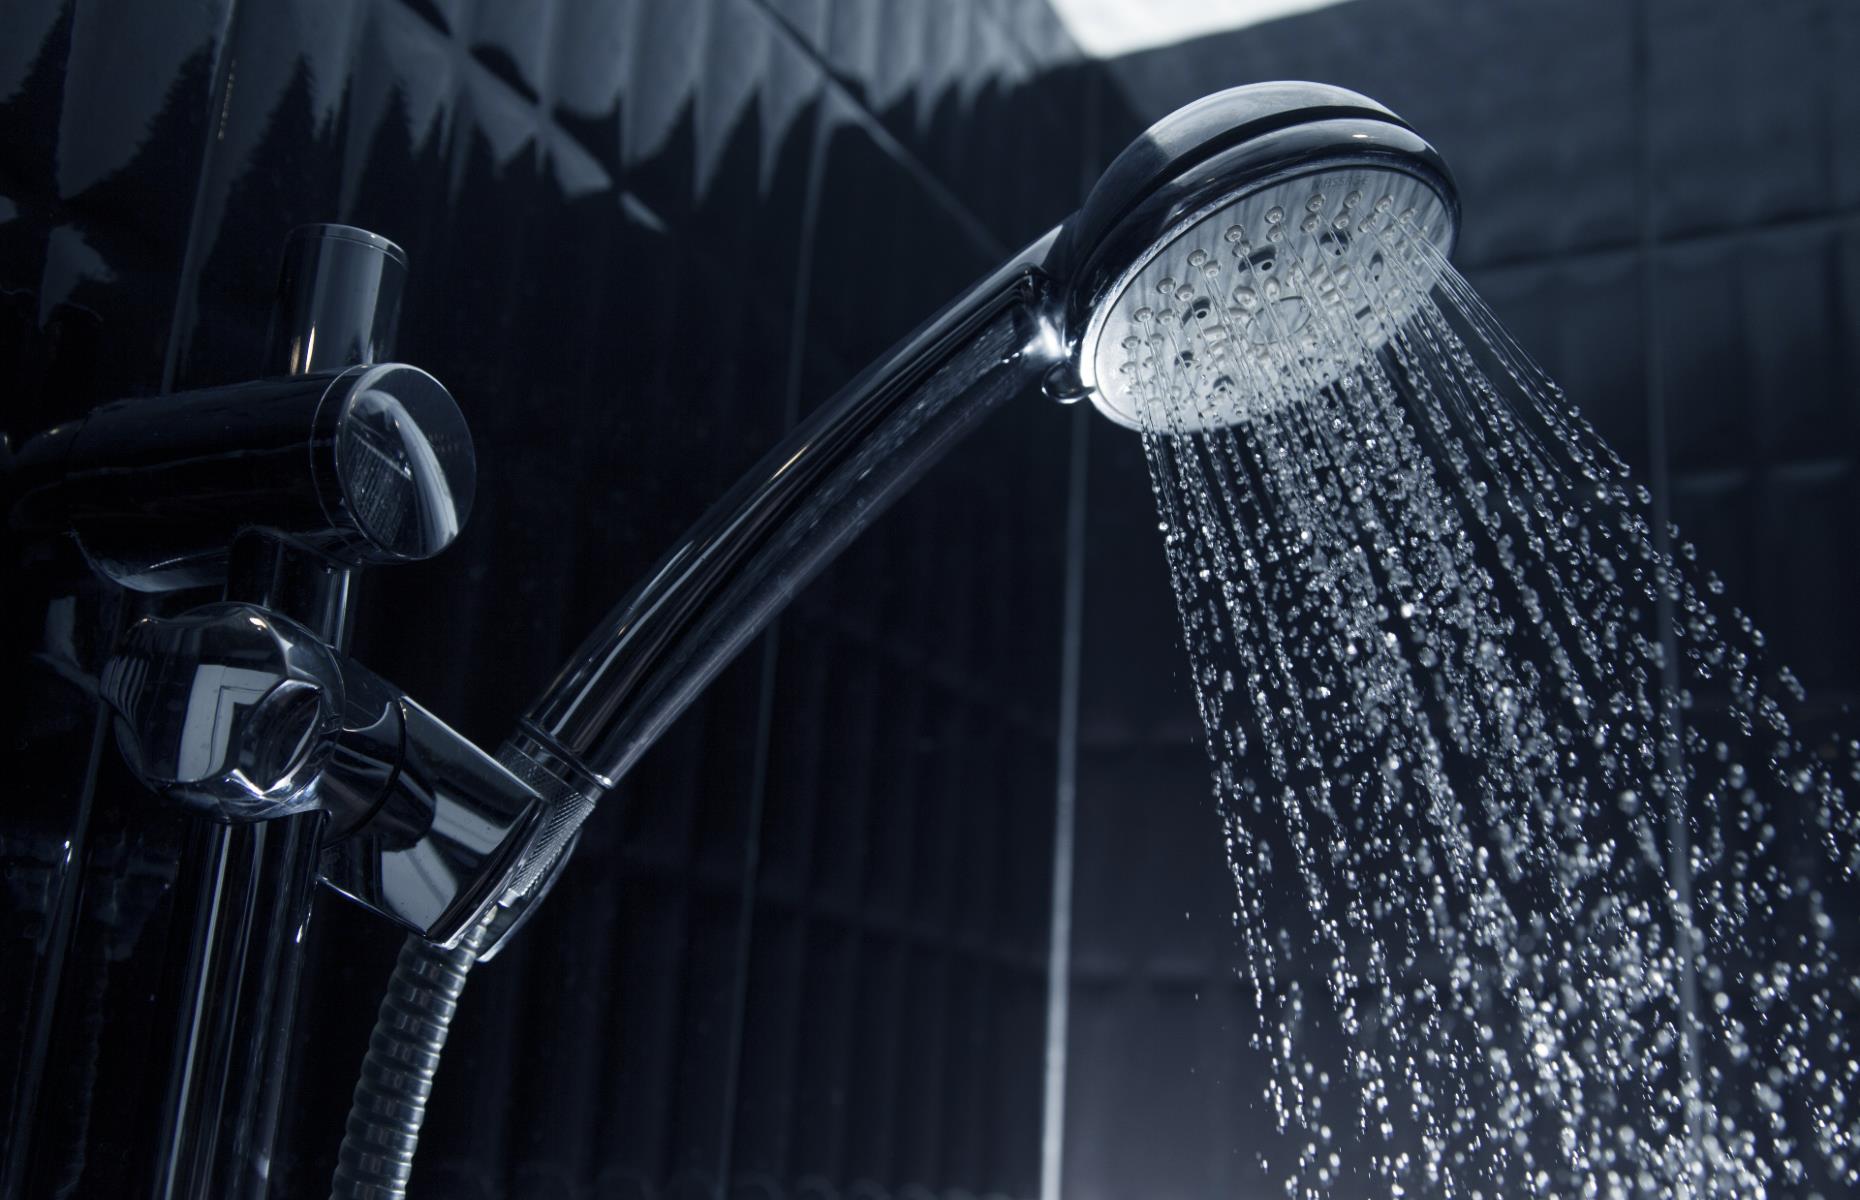 Water levels in America's showerheads